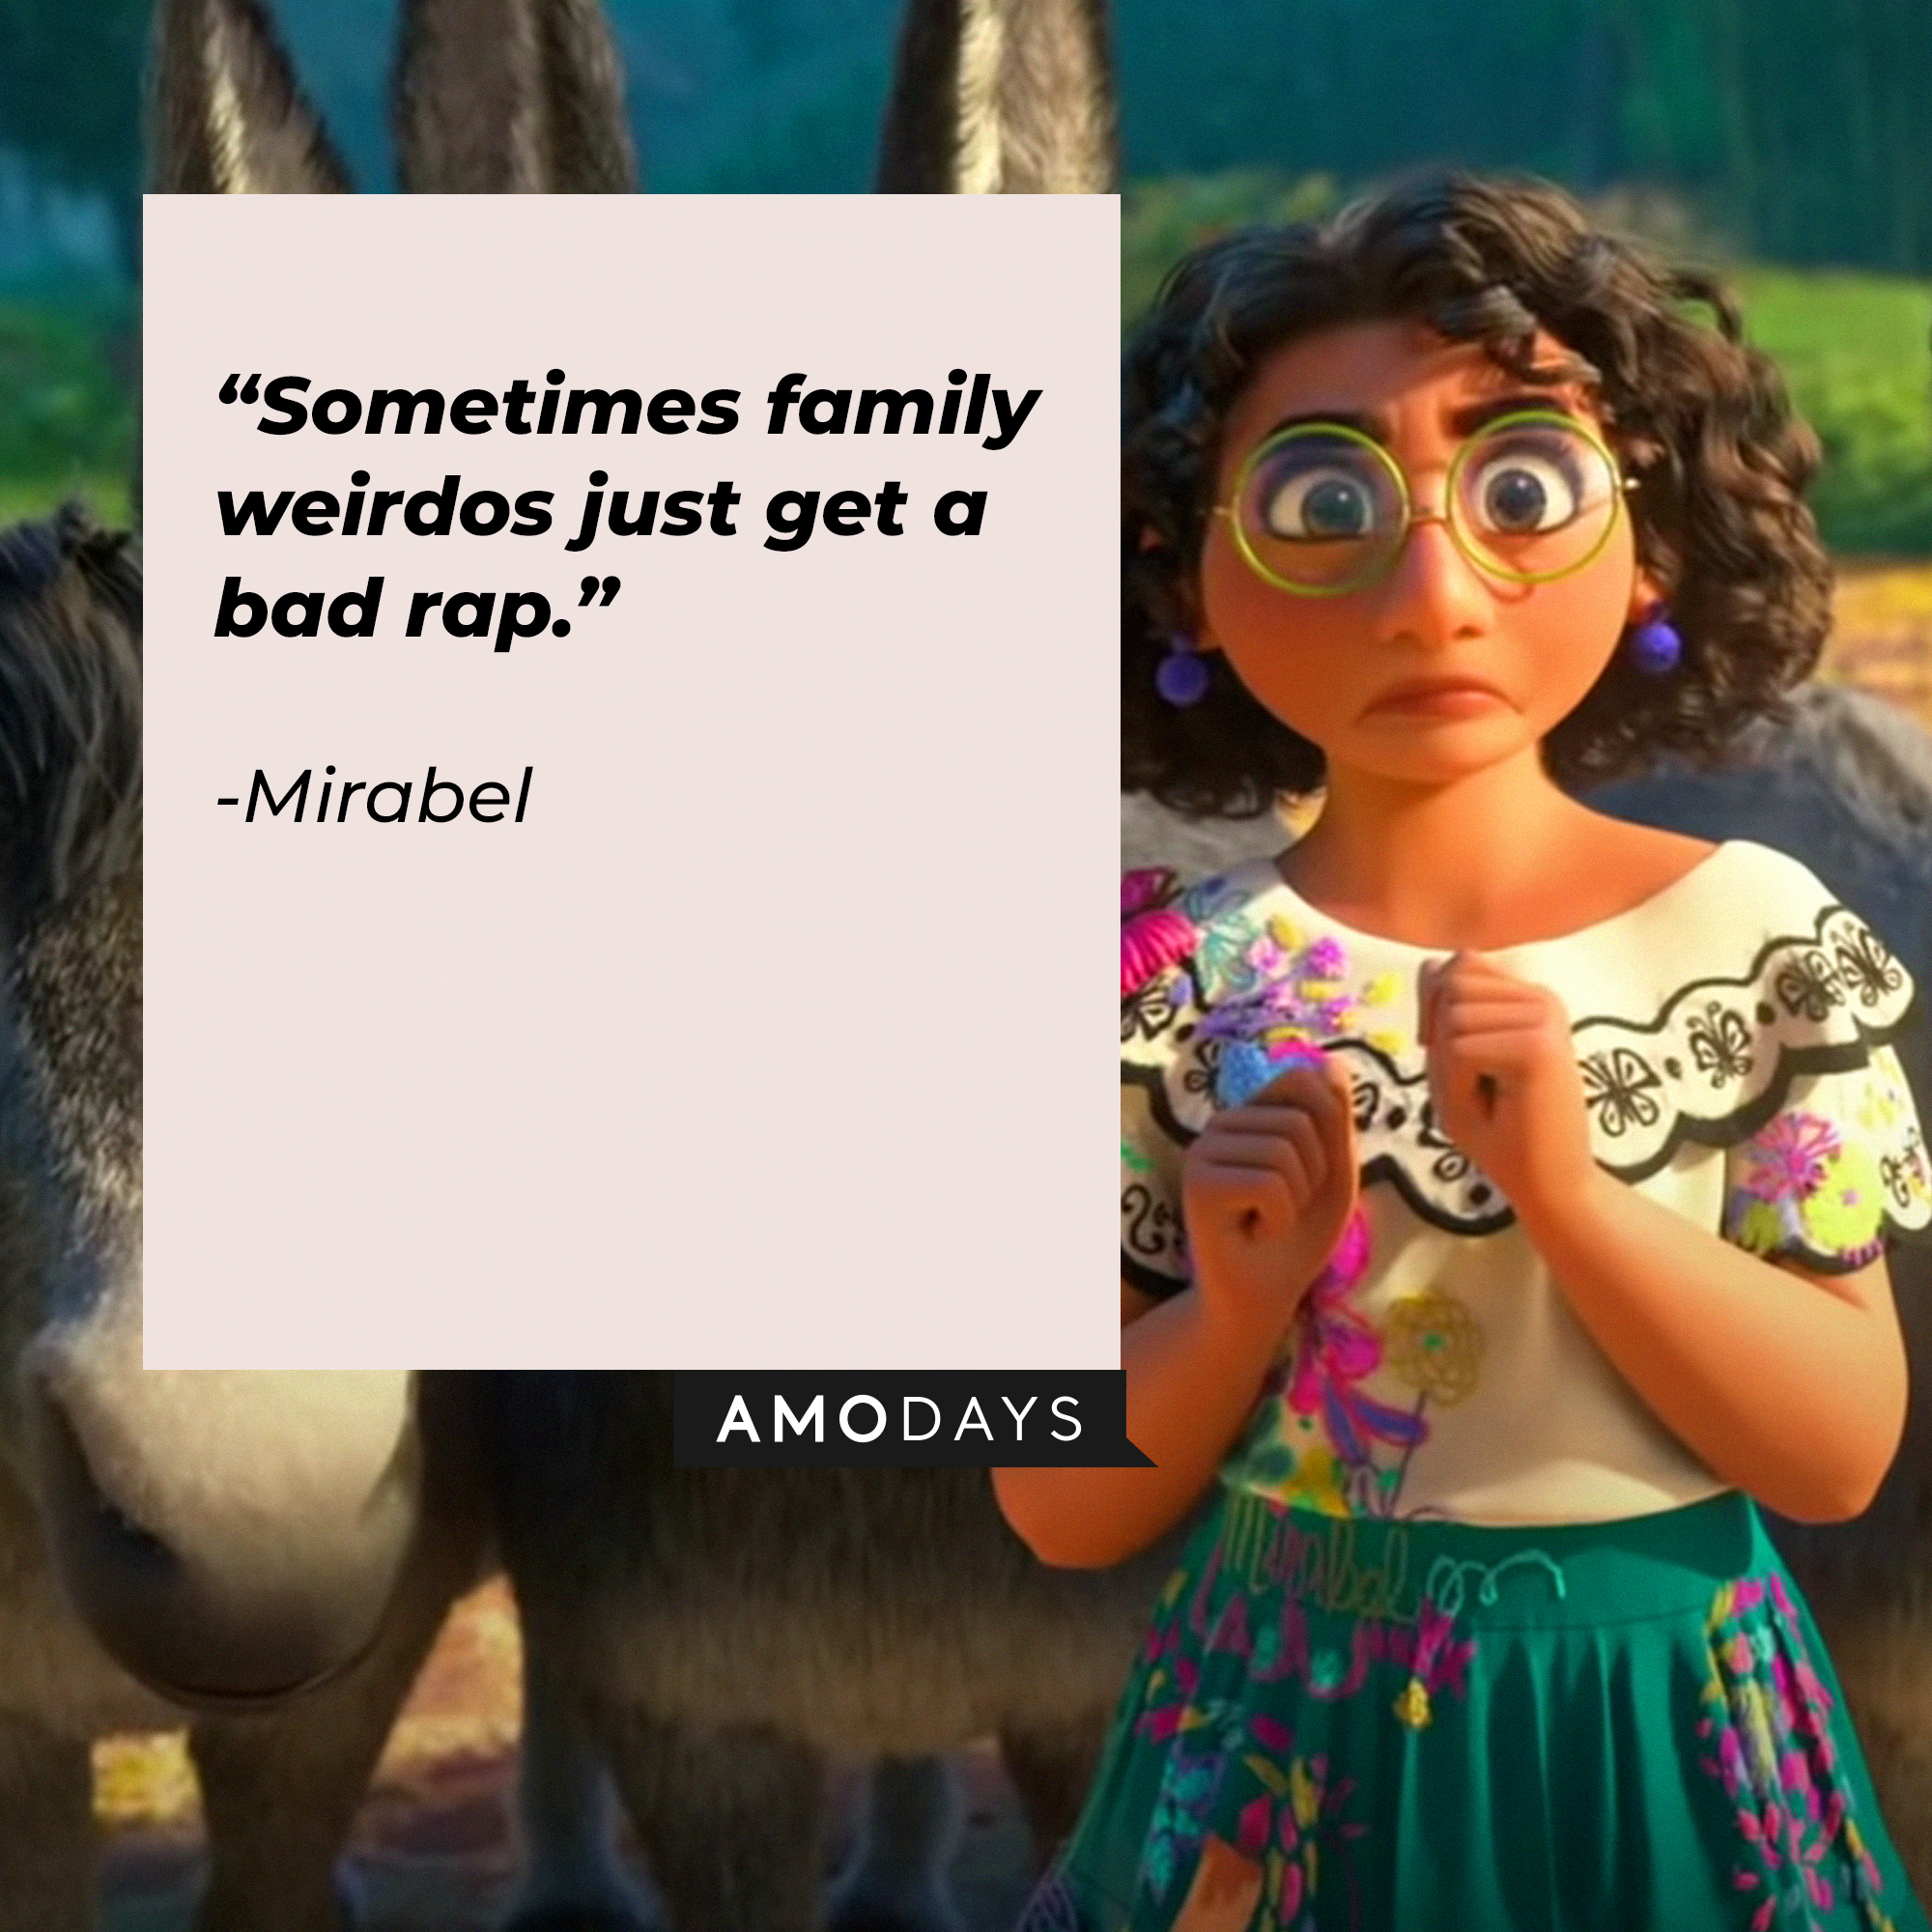 An image of Mirabel, with her quote: "Sometimes family weirdos just get a bad rap." | Source: Youtube.com/DisneyMusicVEVO